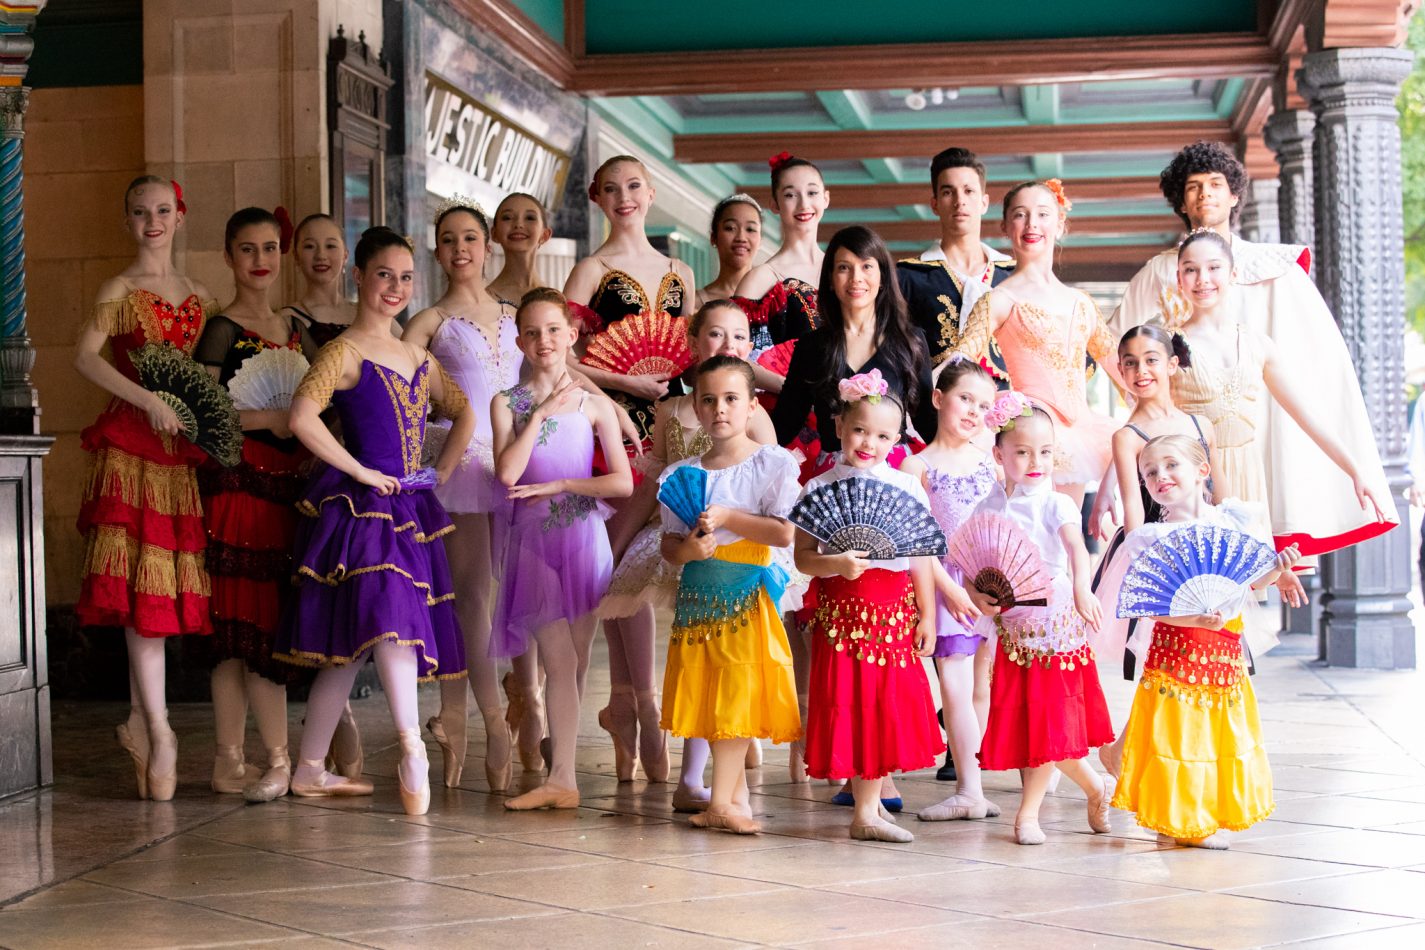 Gallery 1 - The Children's Ballet Presents Aladdin and the Wonderful Lamp